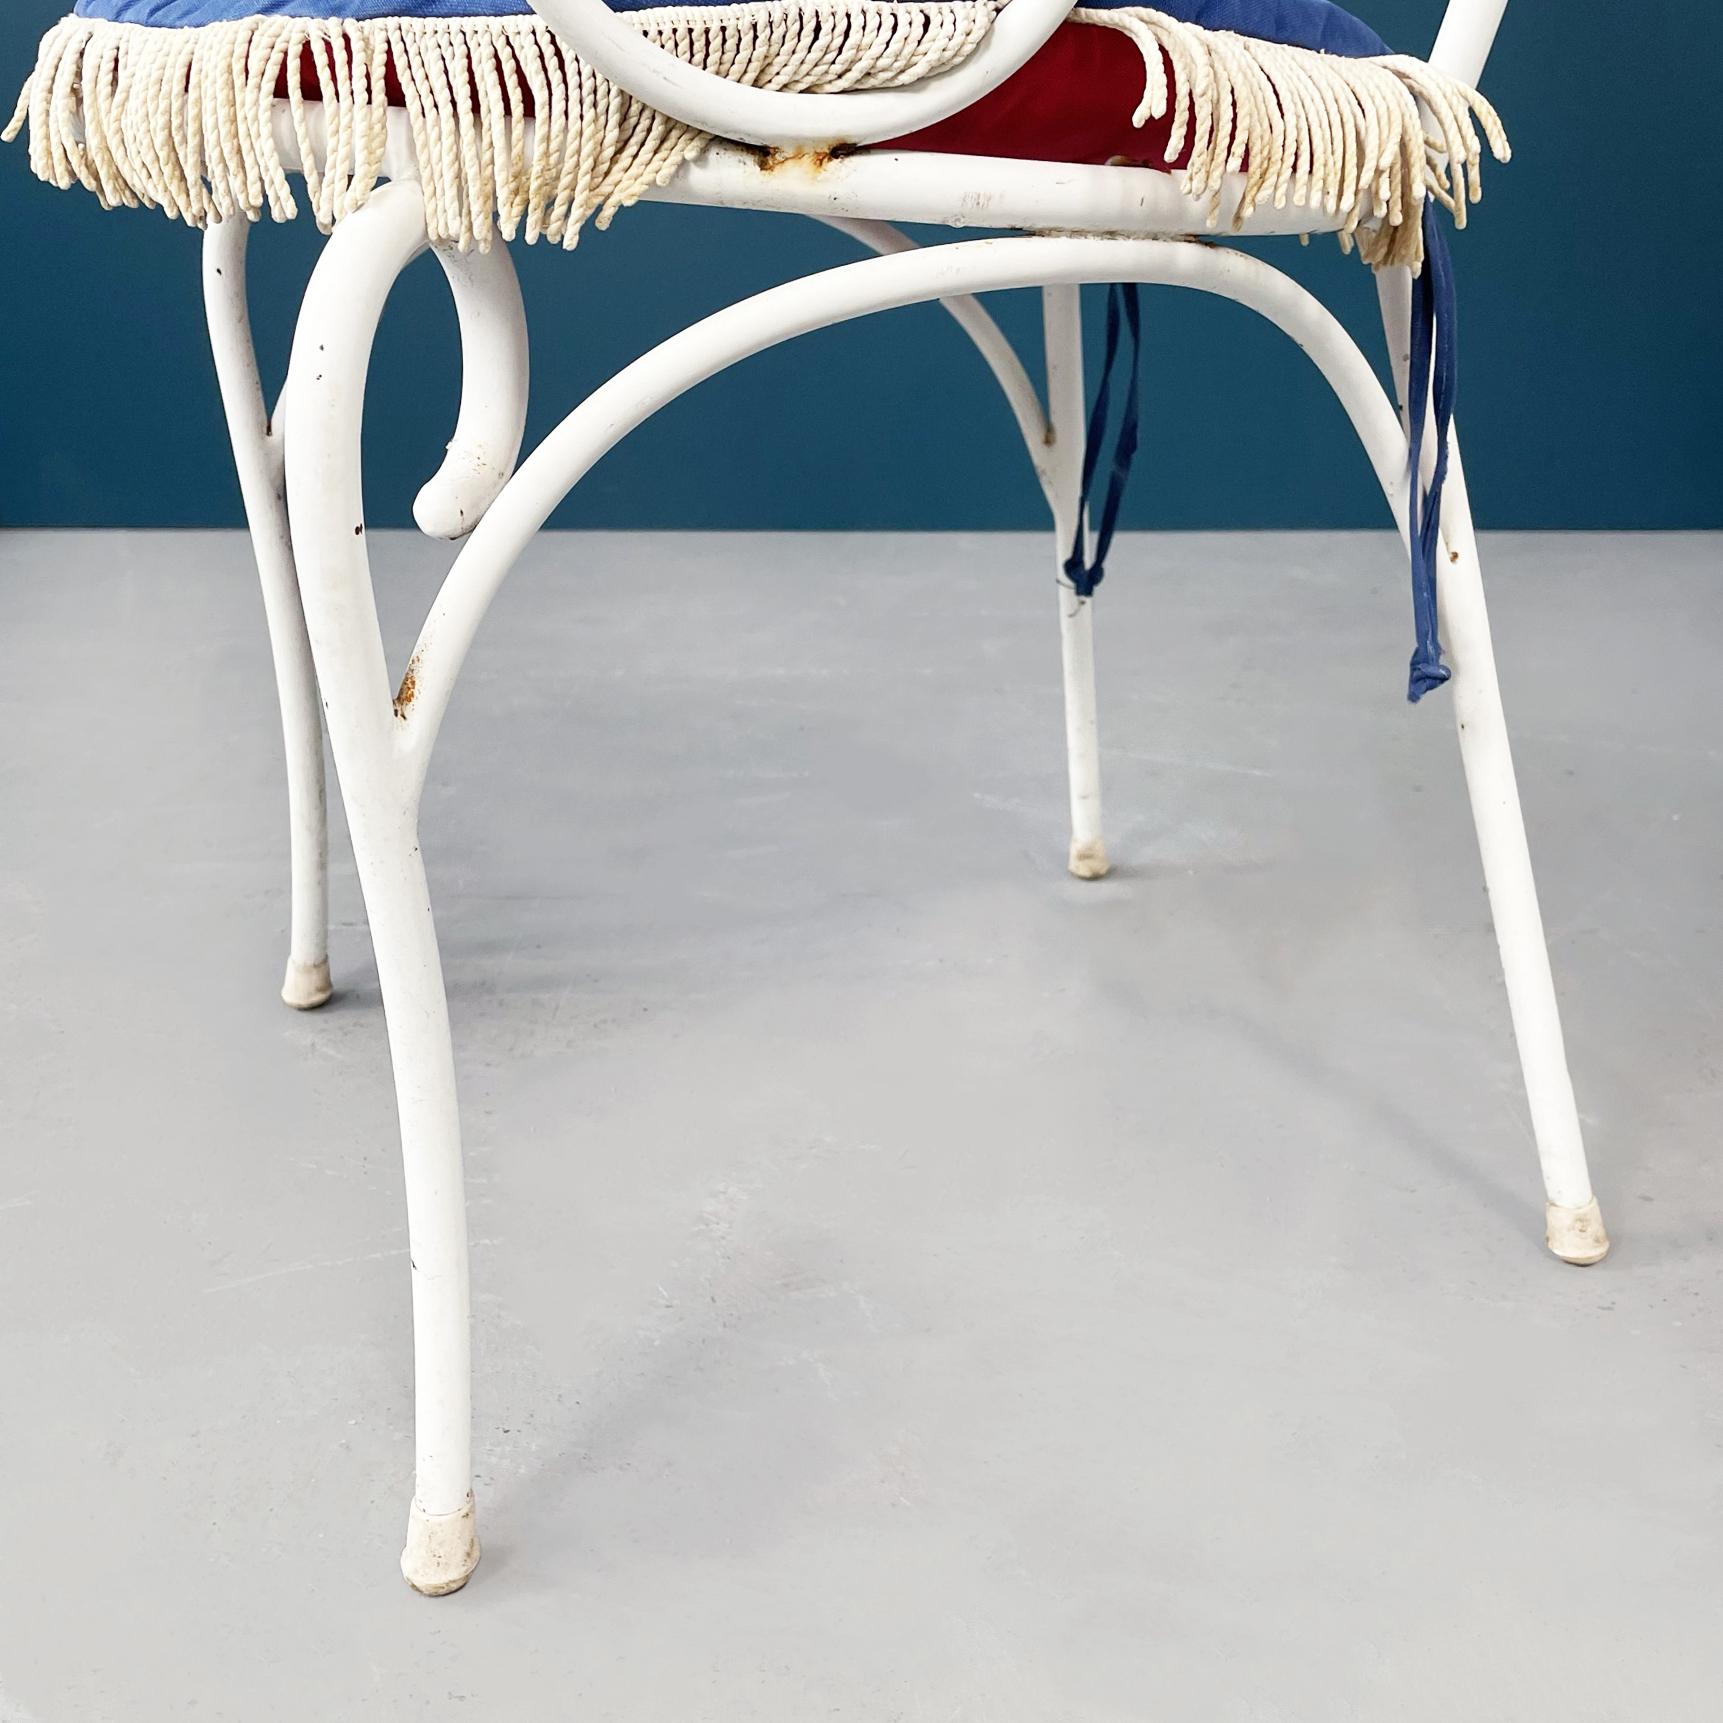 Italian Mid-Century Garden Chairs in White Wrought Iron and Fabric, 1960s For Sale 6